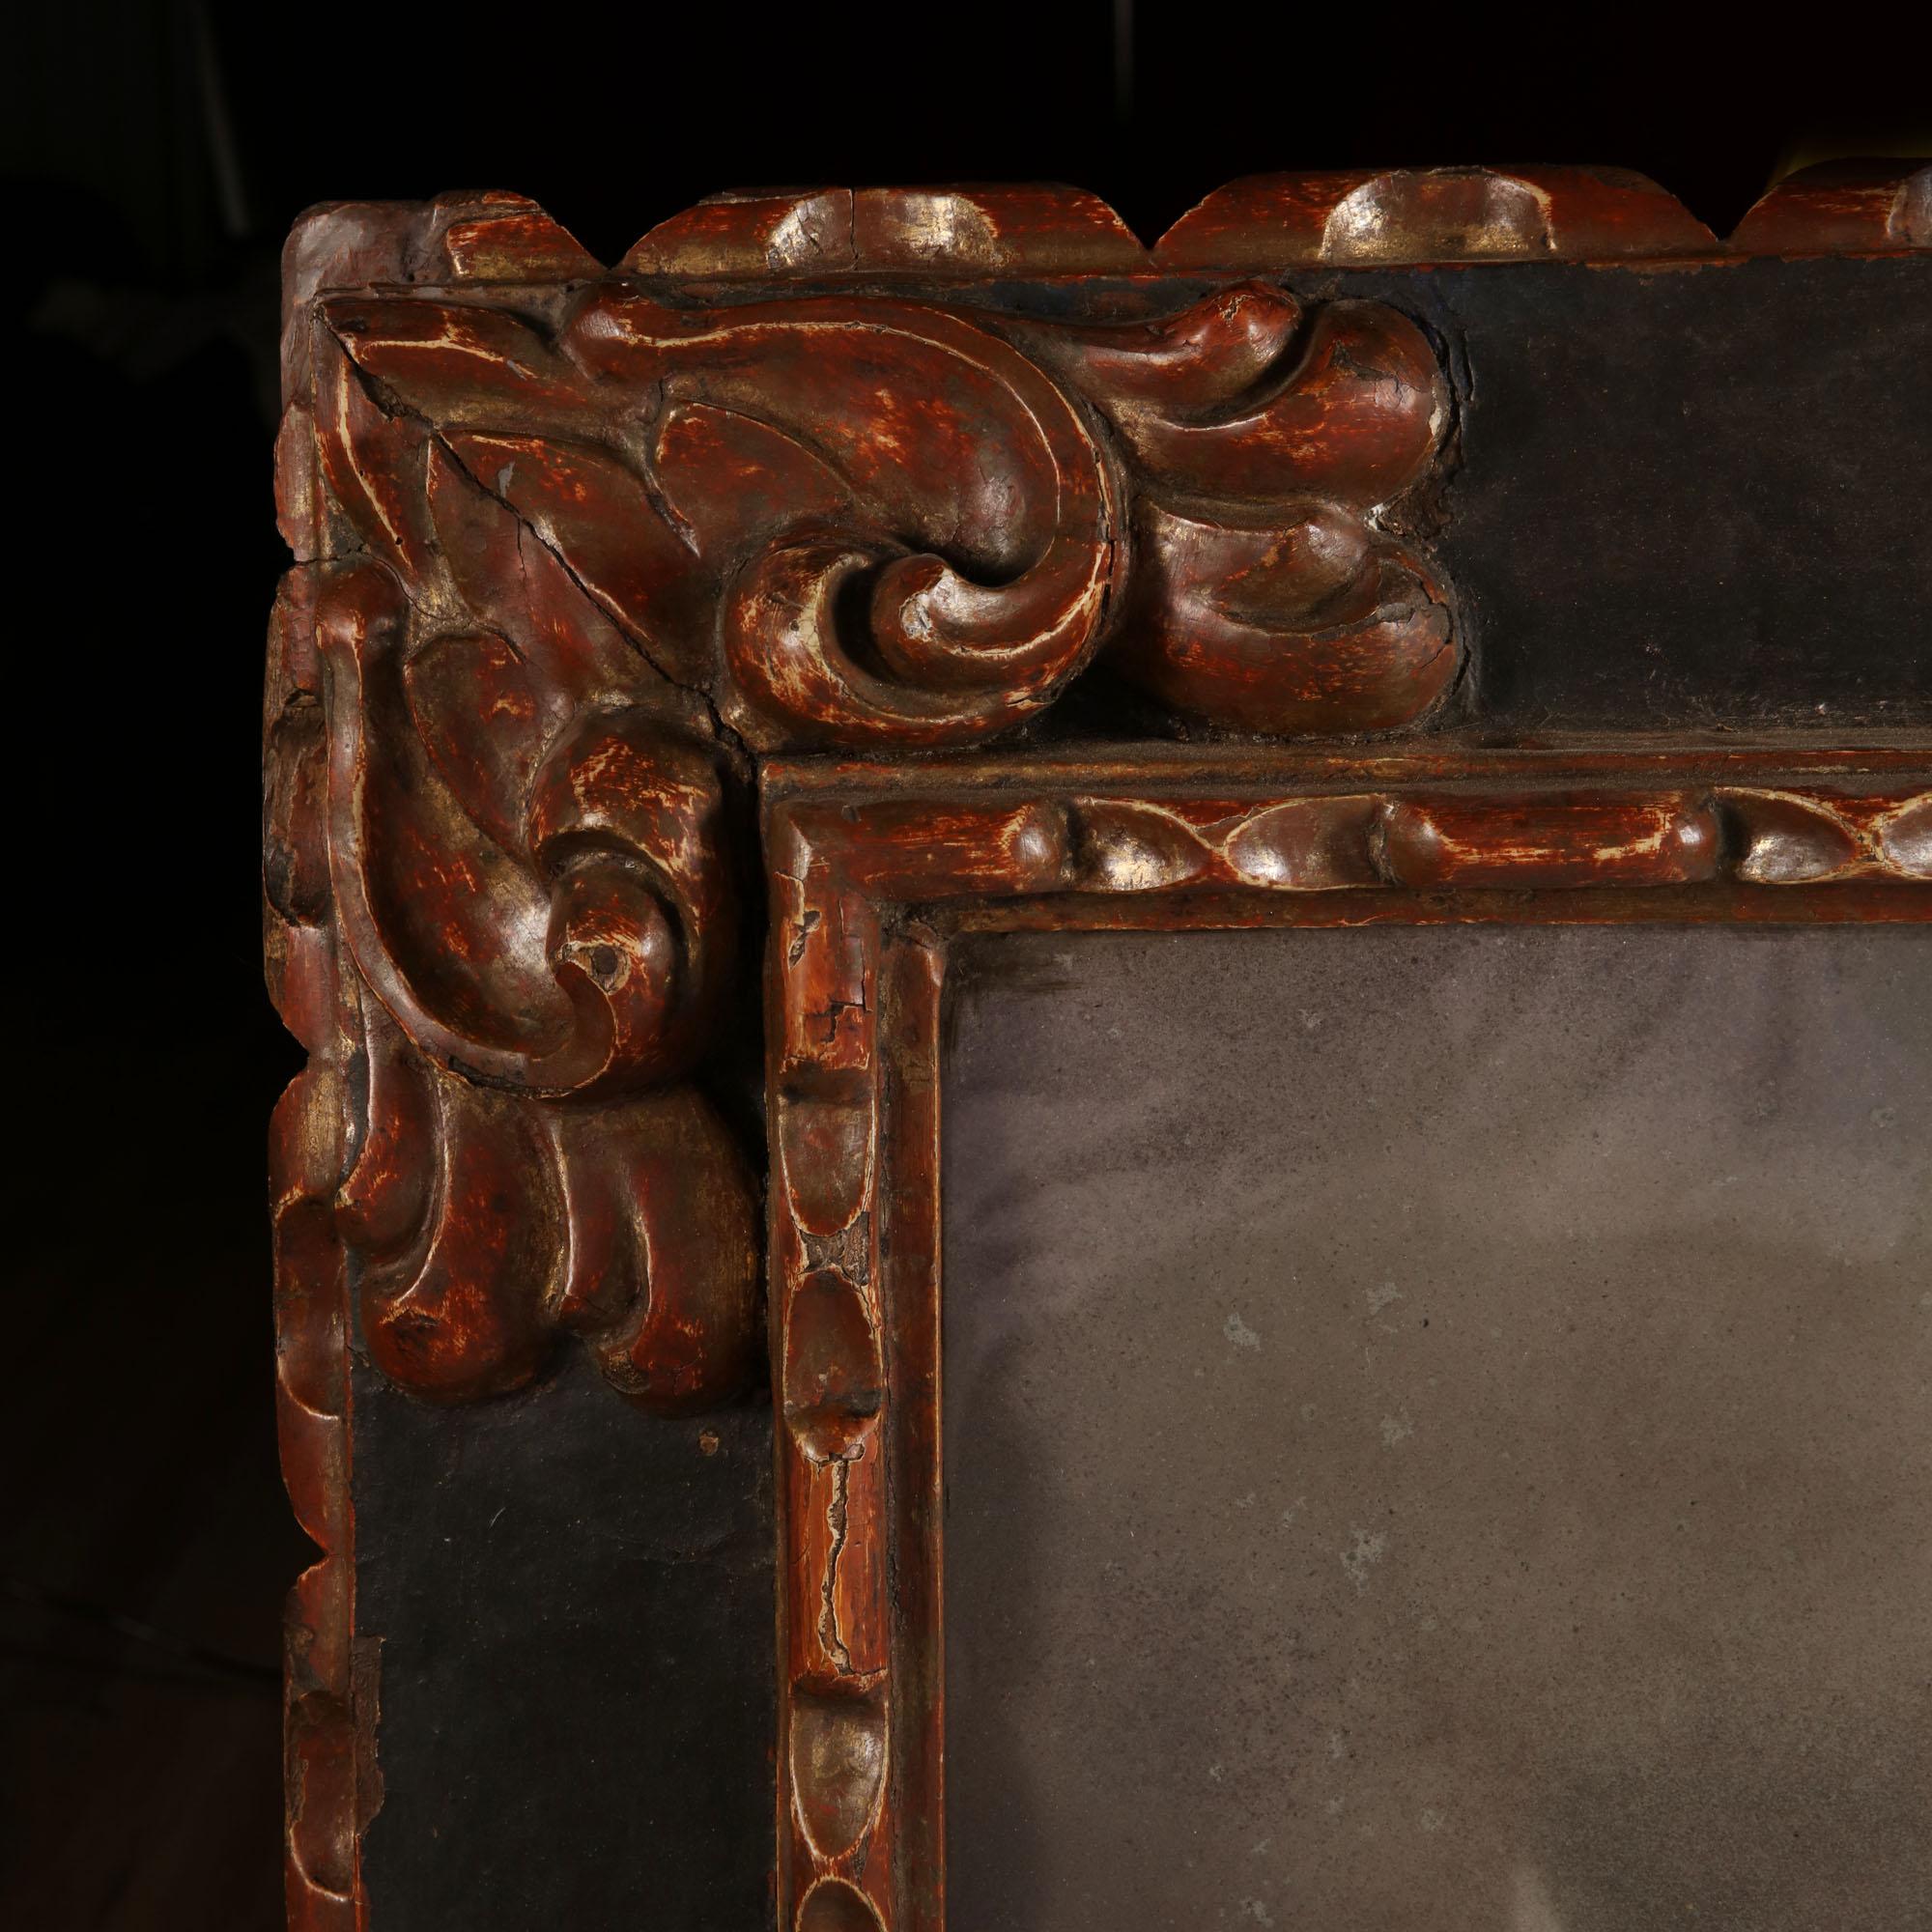 A late 17th century Spanish carved baroque mirror frame of large scale, with later mercury glass mirror plate.